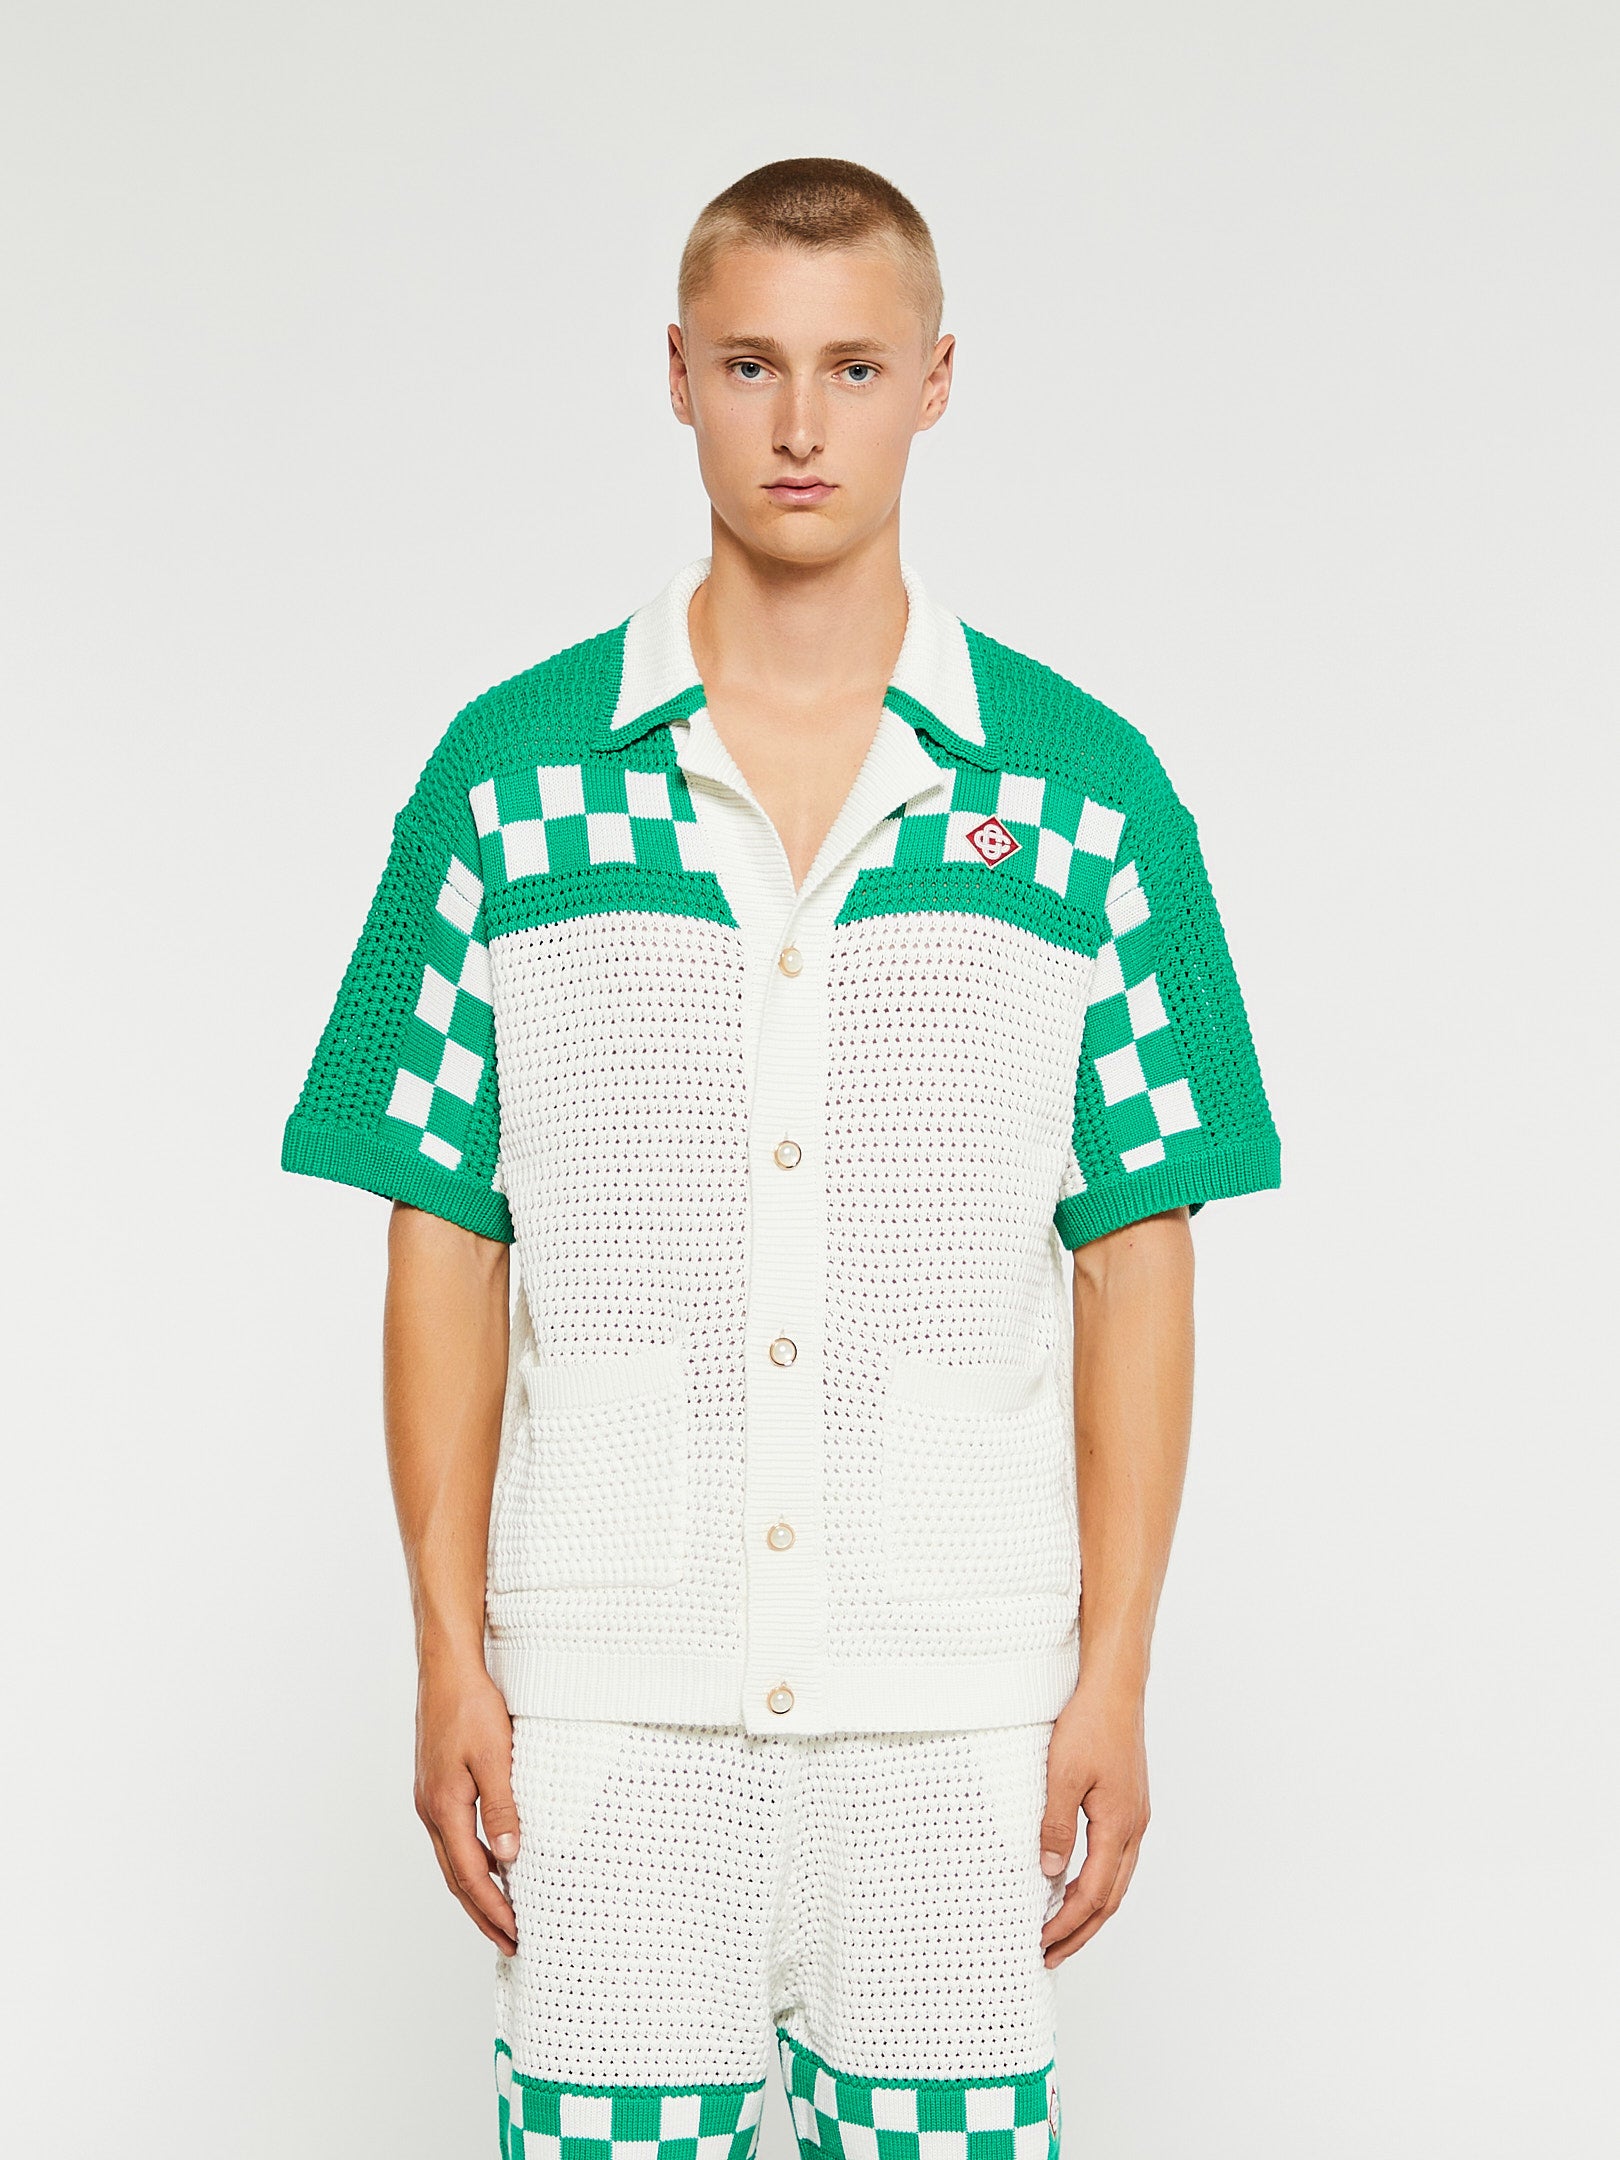 Casablanca - Faux Crochet Shirt in White and Green